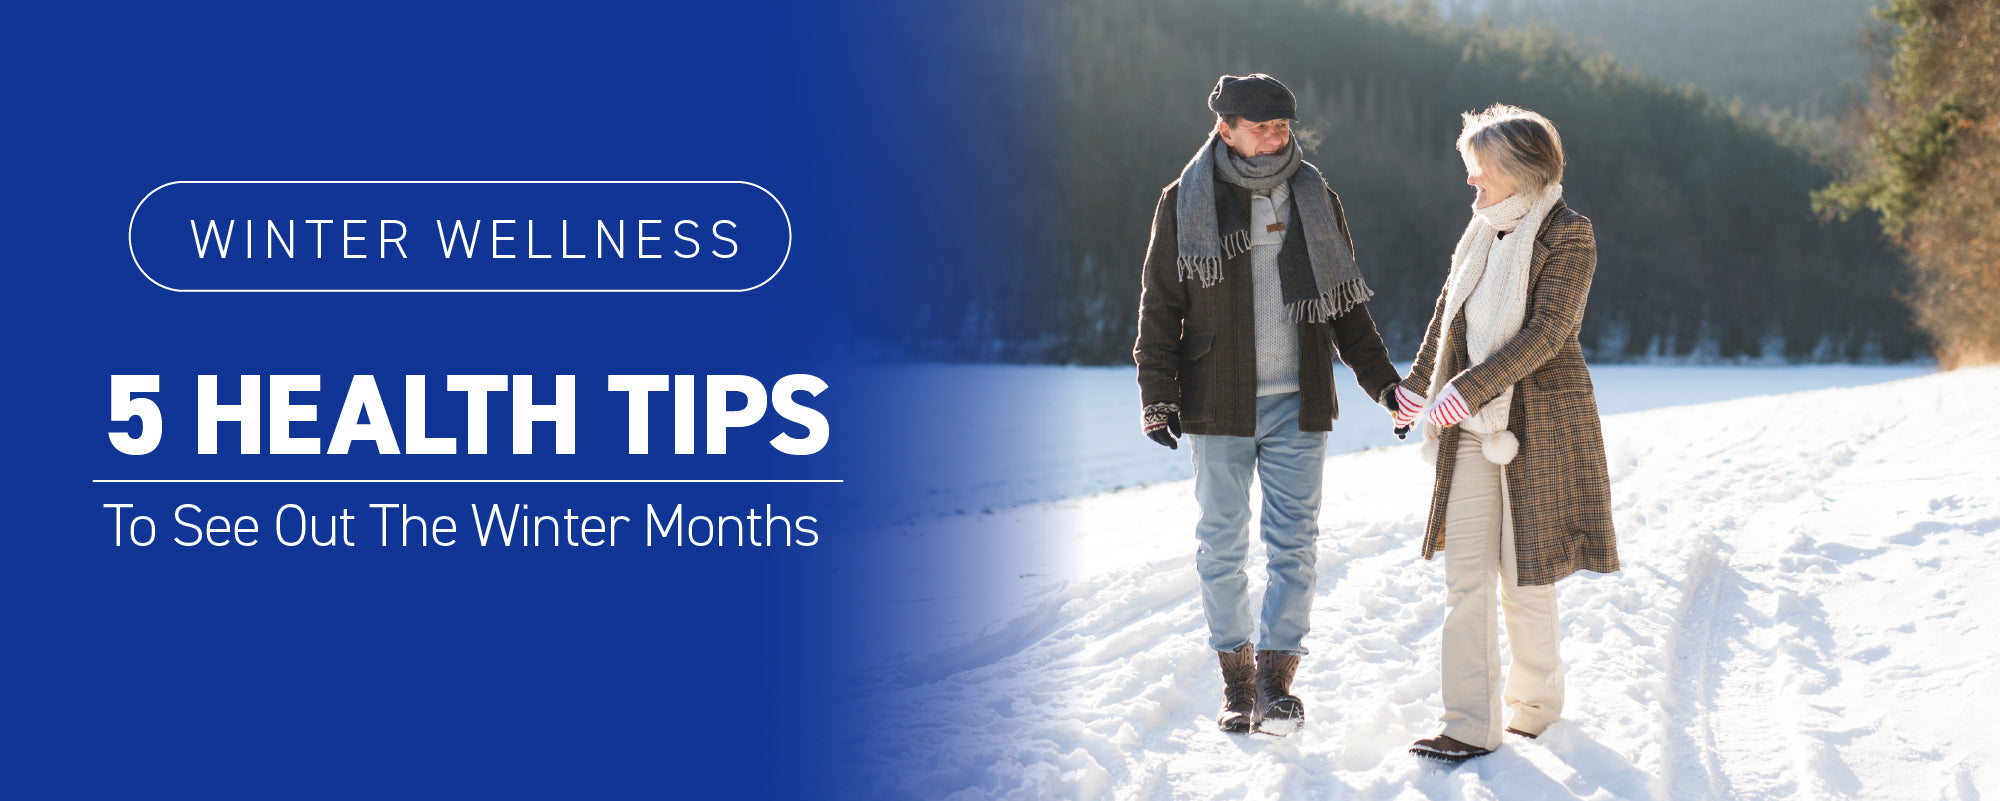 Winter Wellness: 5 health tips to see out the winter months